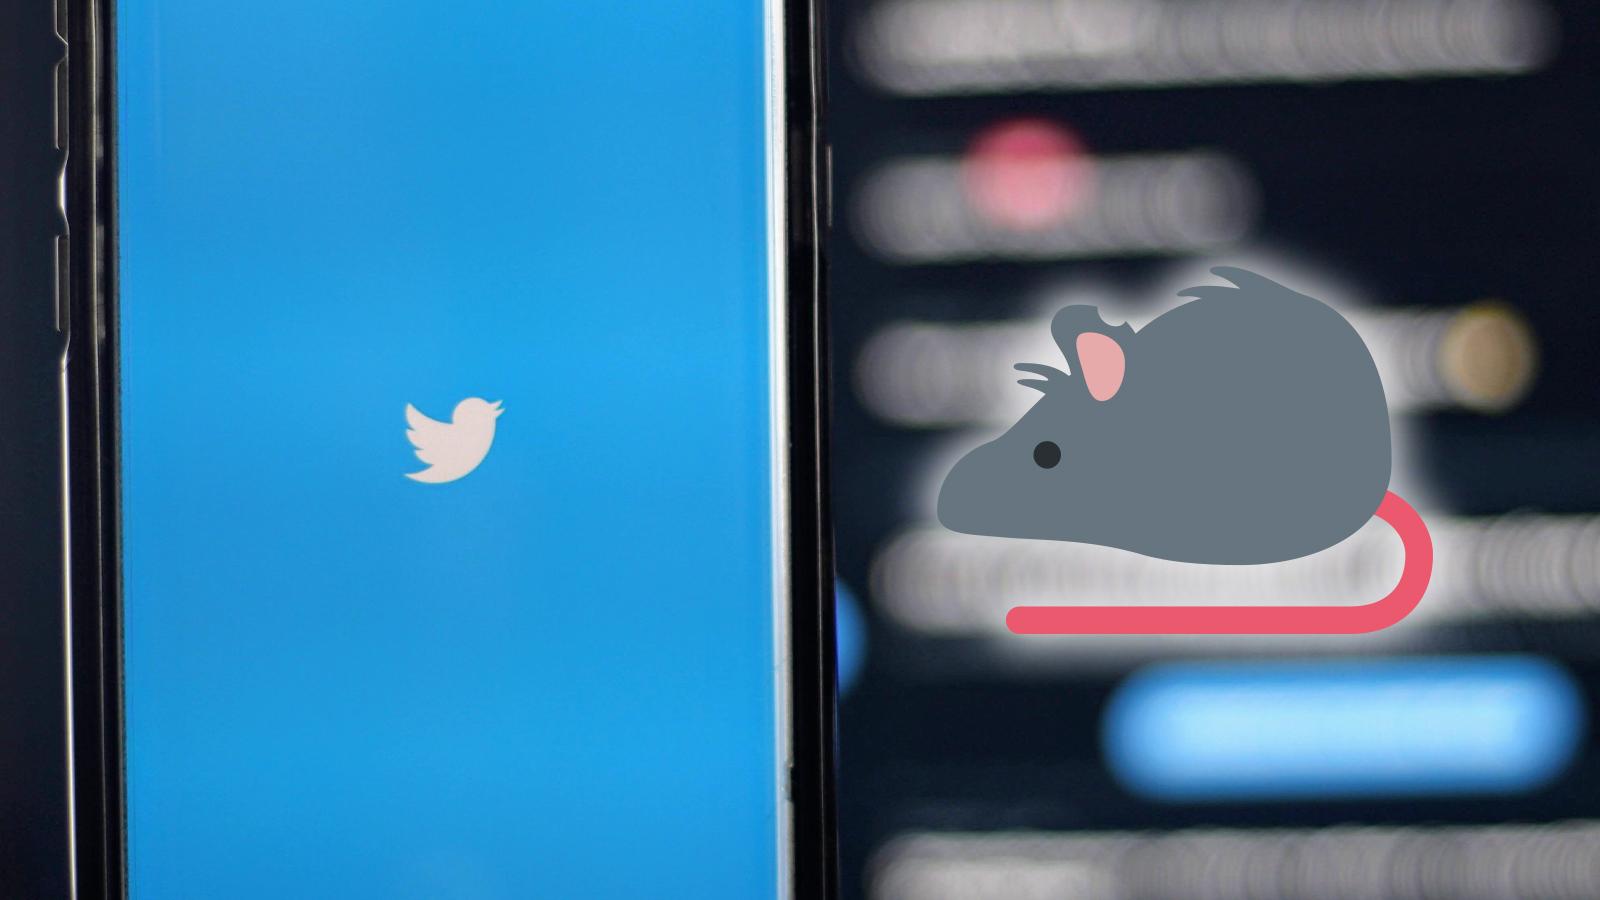 On Twitter, Who Needs a Check Mark When You Can Have a Rat? - The New York  Times